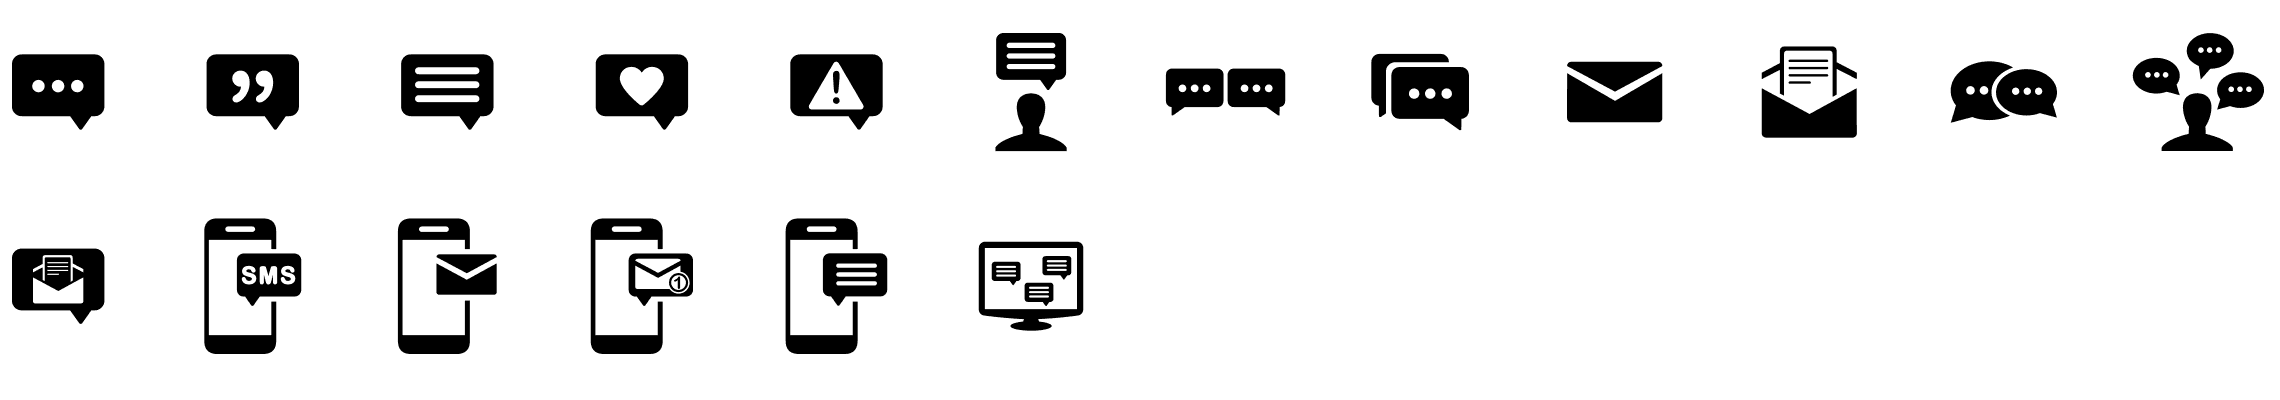 chat-messages-glyph-icons-preview